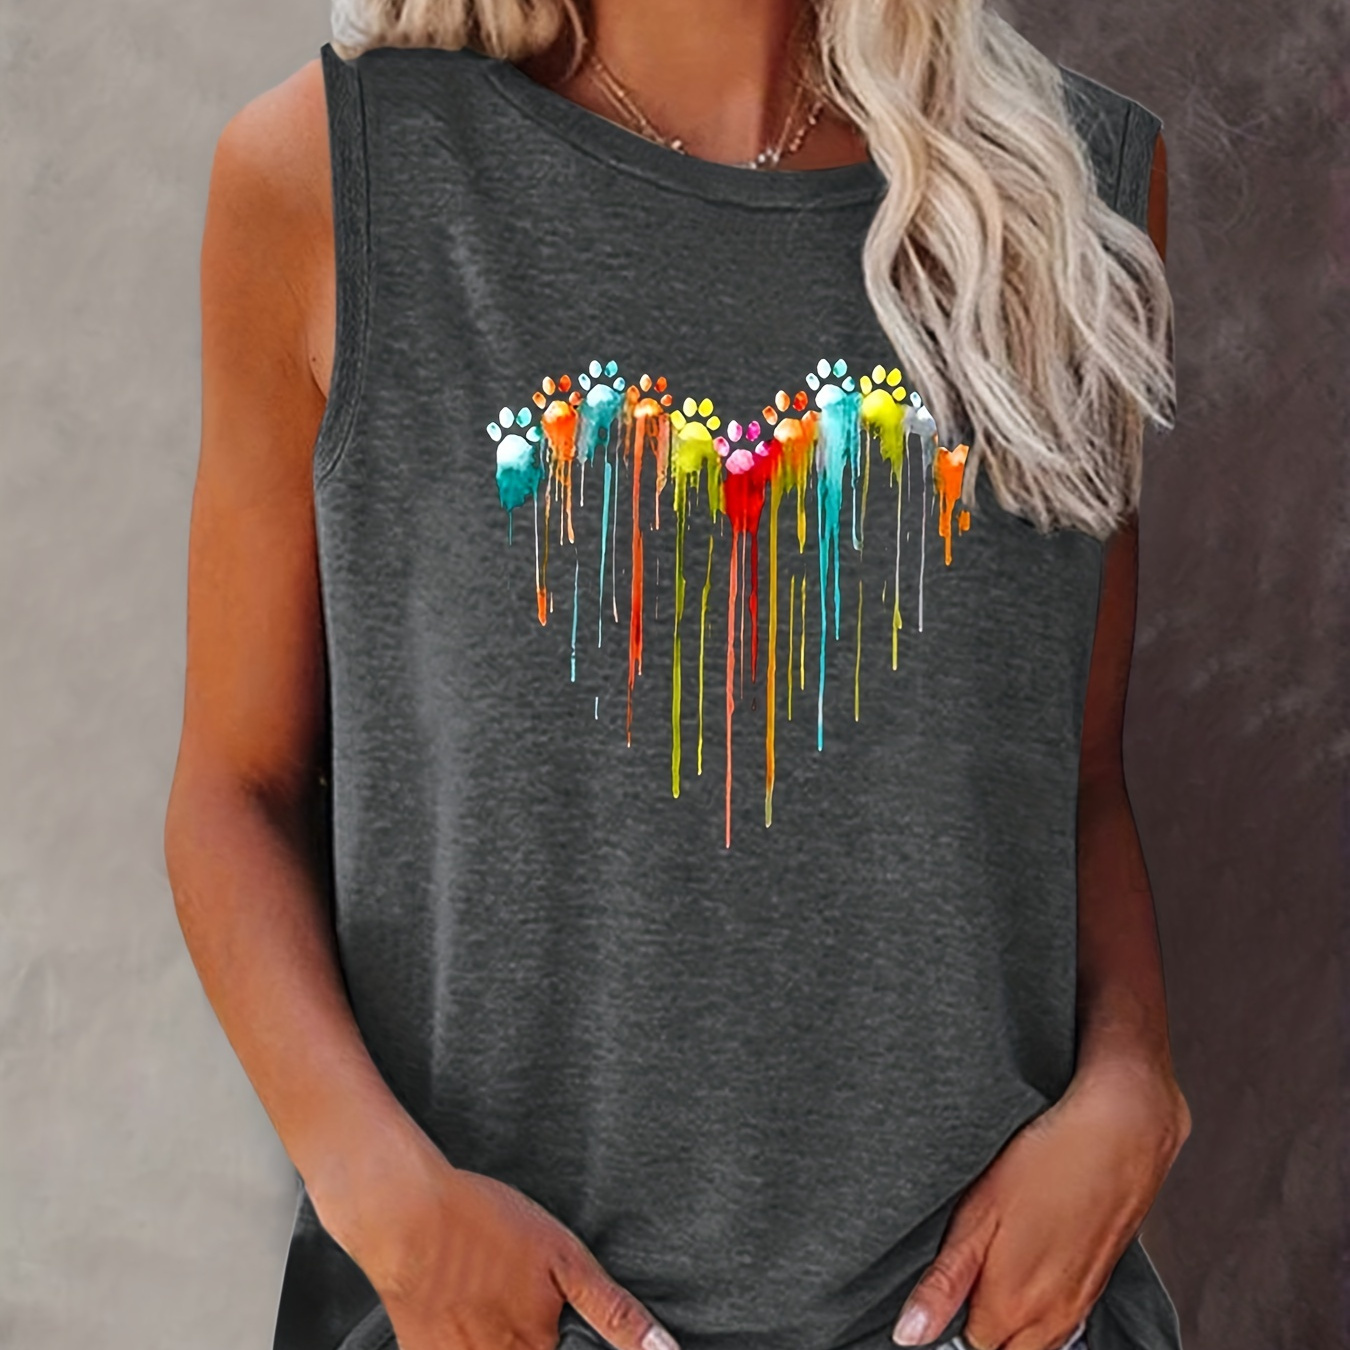 Colorful Paw Print Crew Neck Tank Top, Casual Sleeveless Top For Summer, Women's Clothing